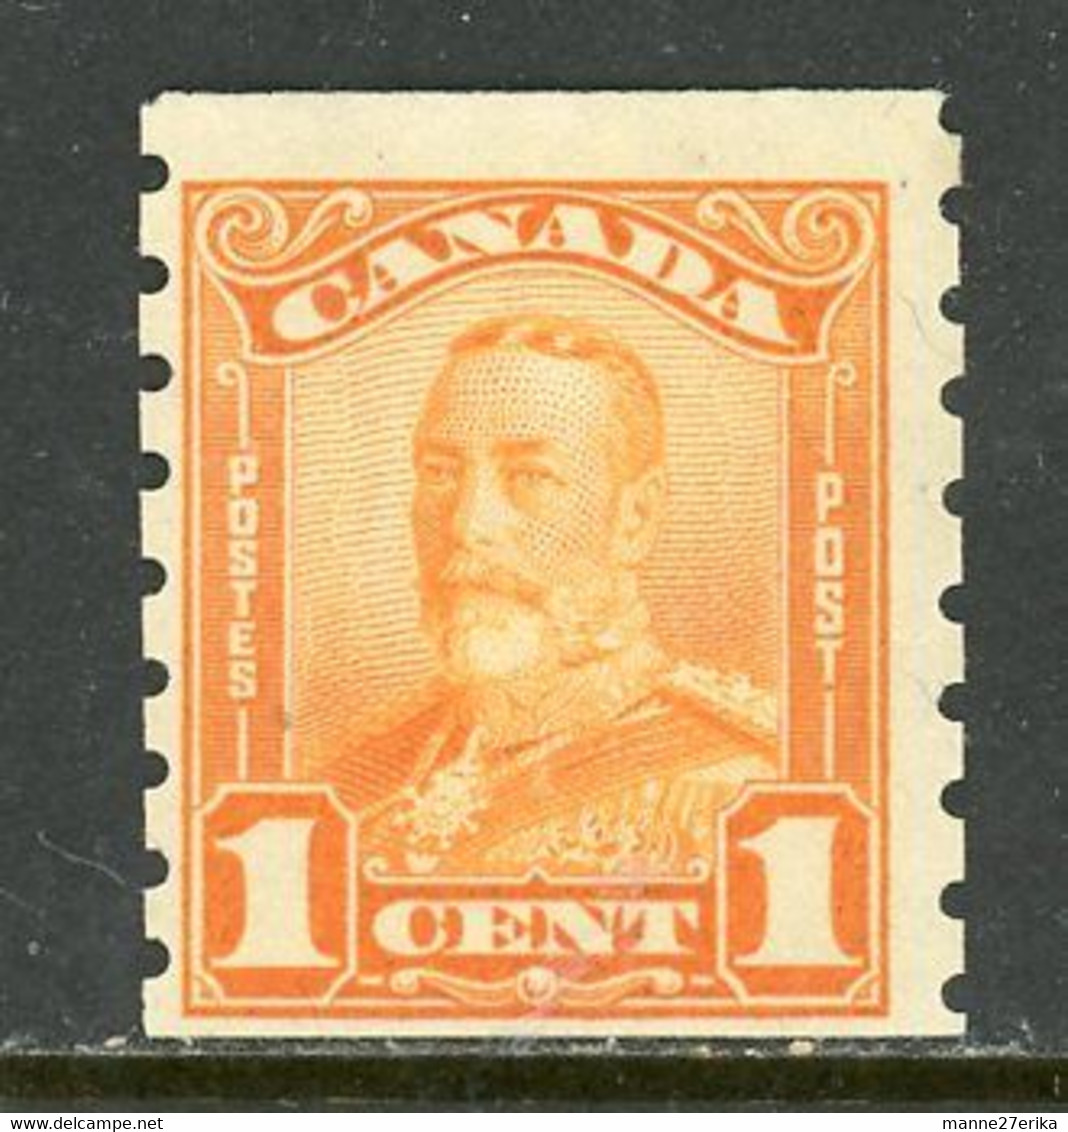 -Canada-1929-"King George V" -COIL-  MH (*) - Coil Stamps